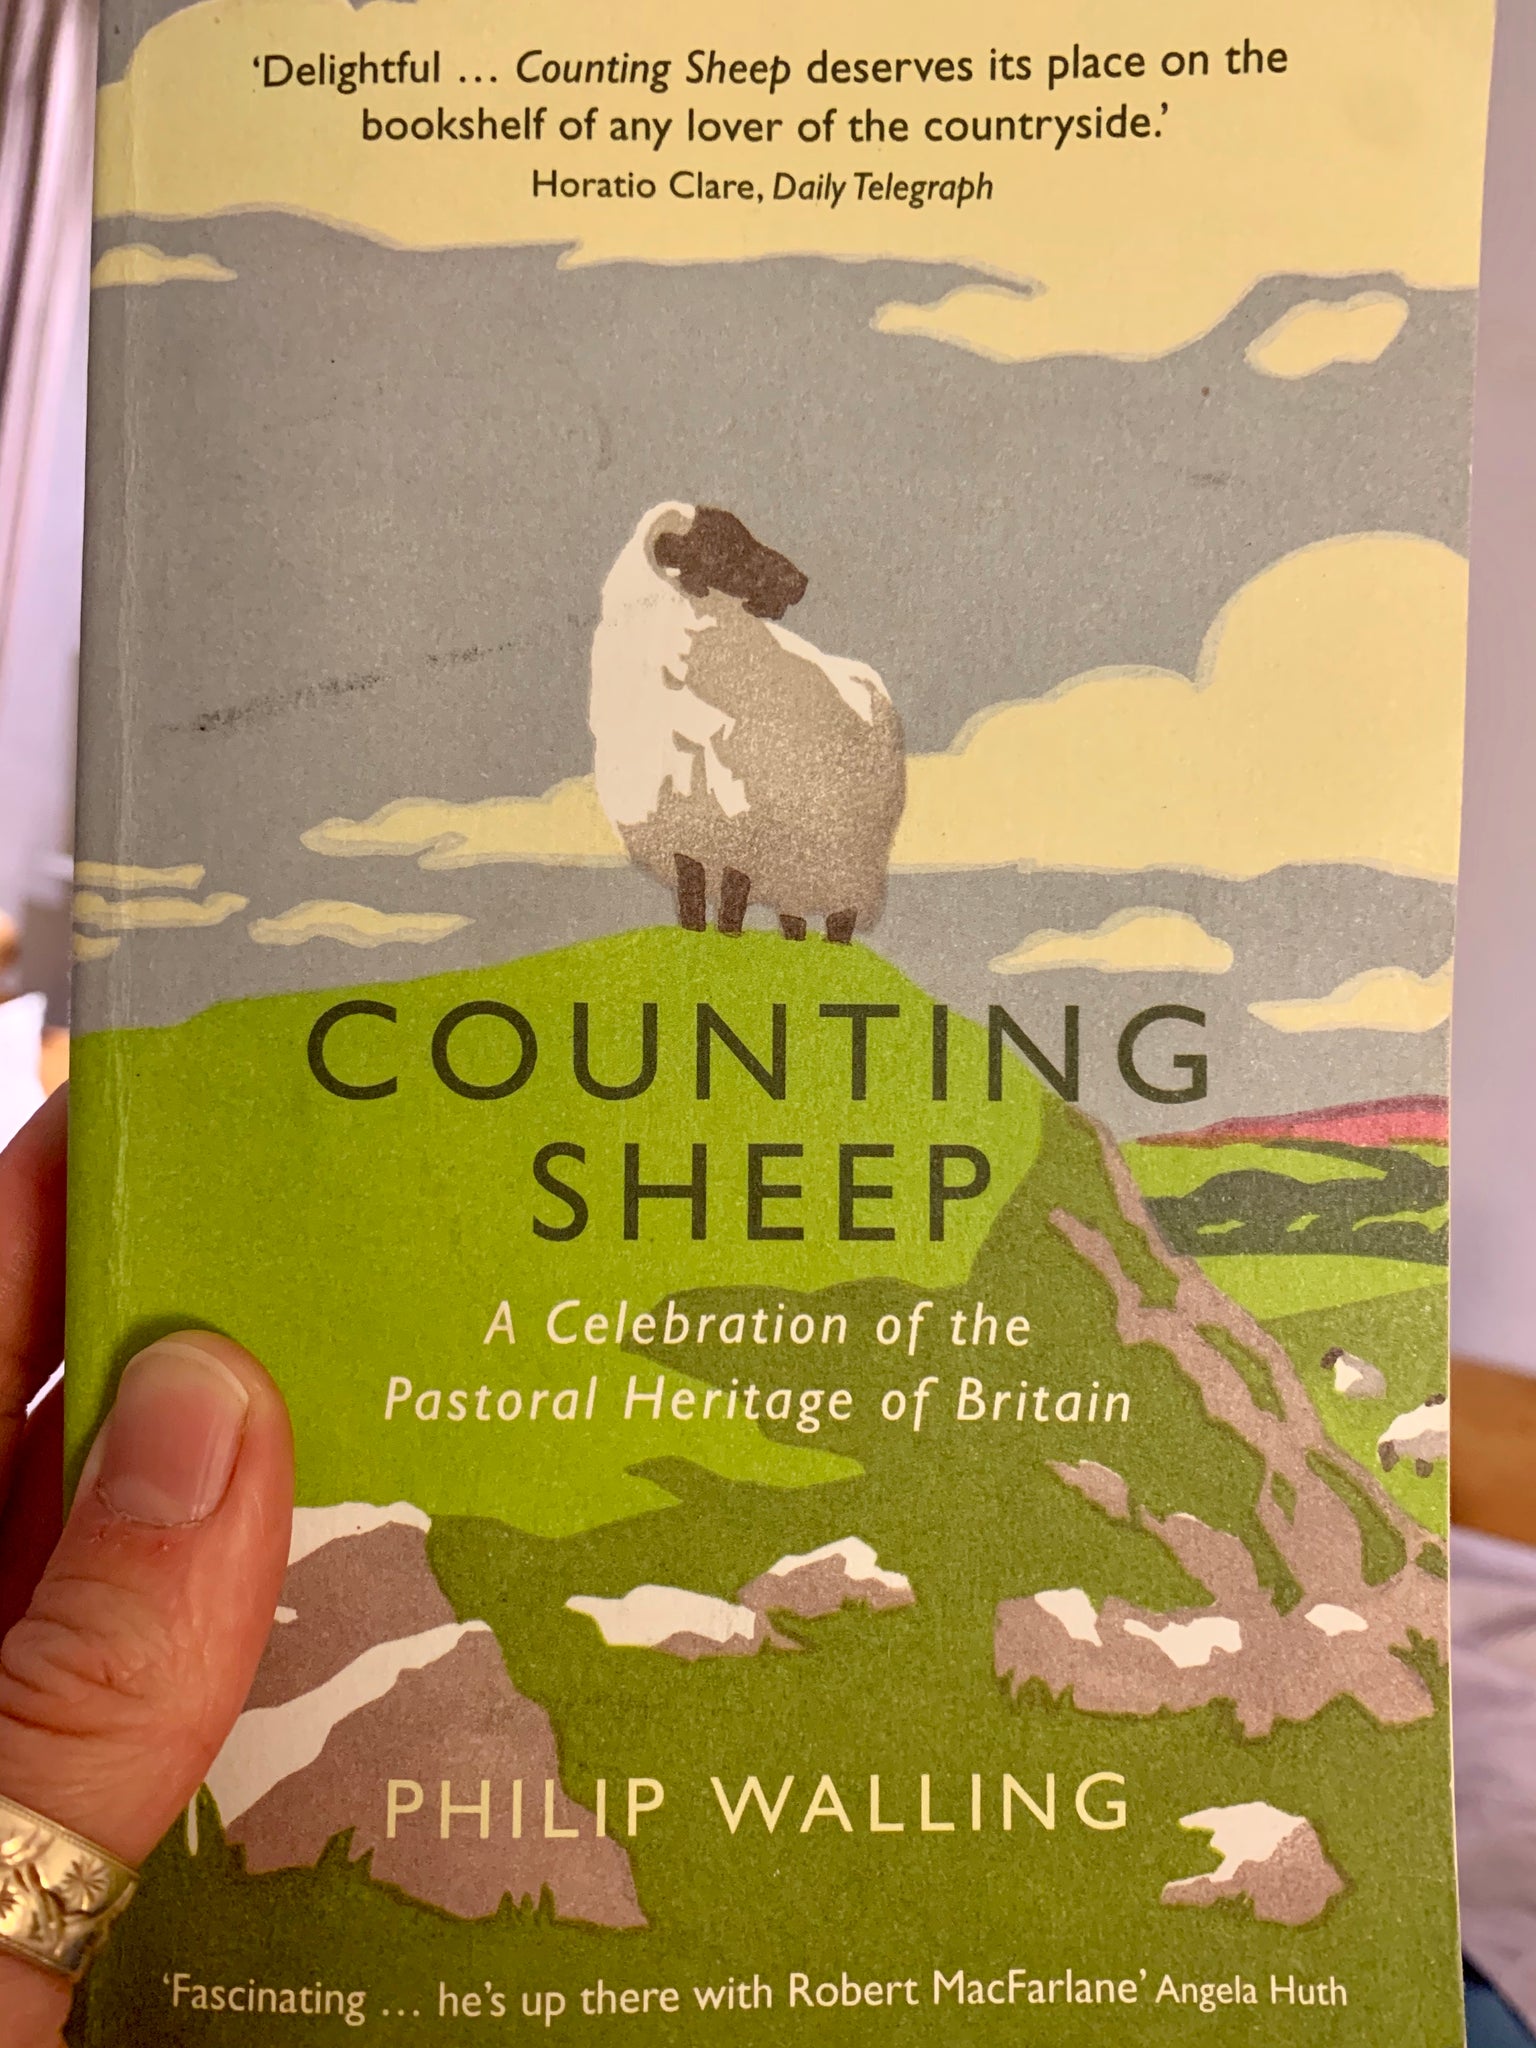 Counting Sheep by Philip Walling, pub. 2015